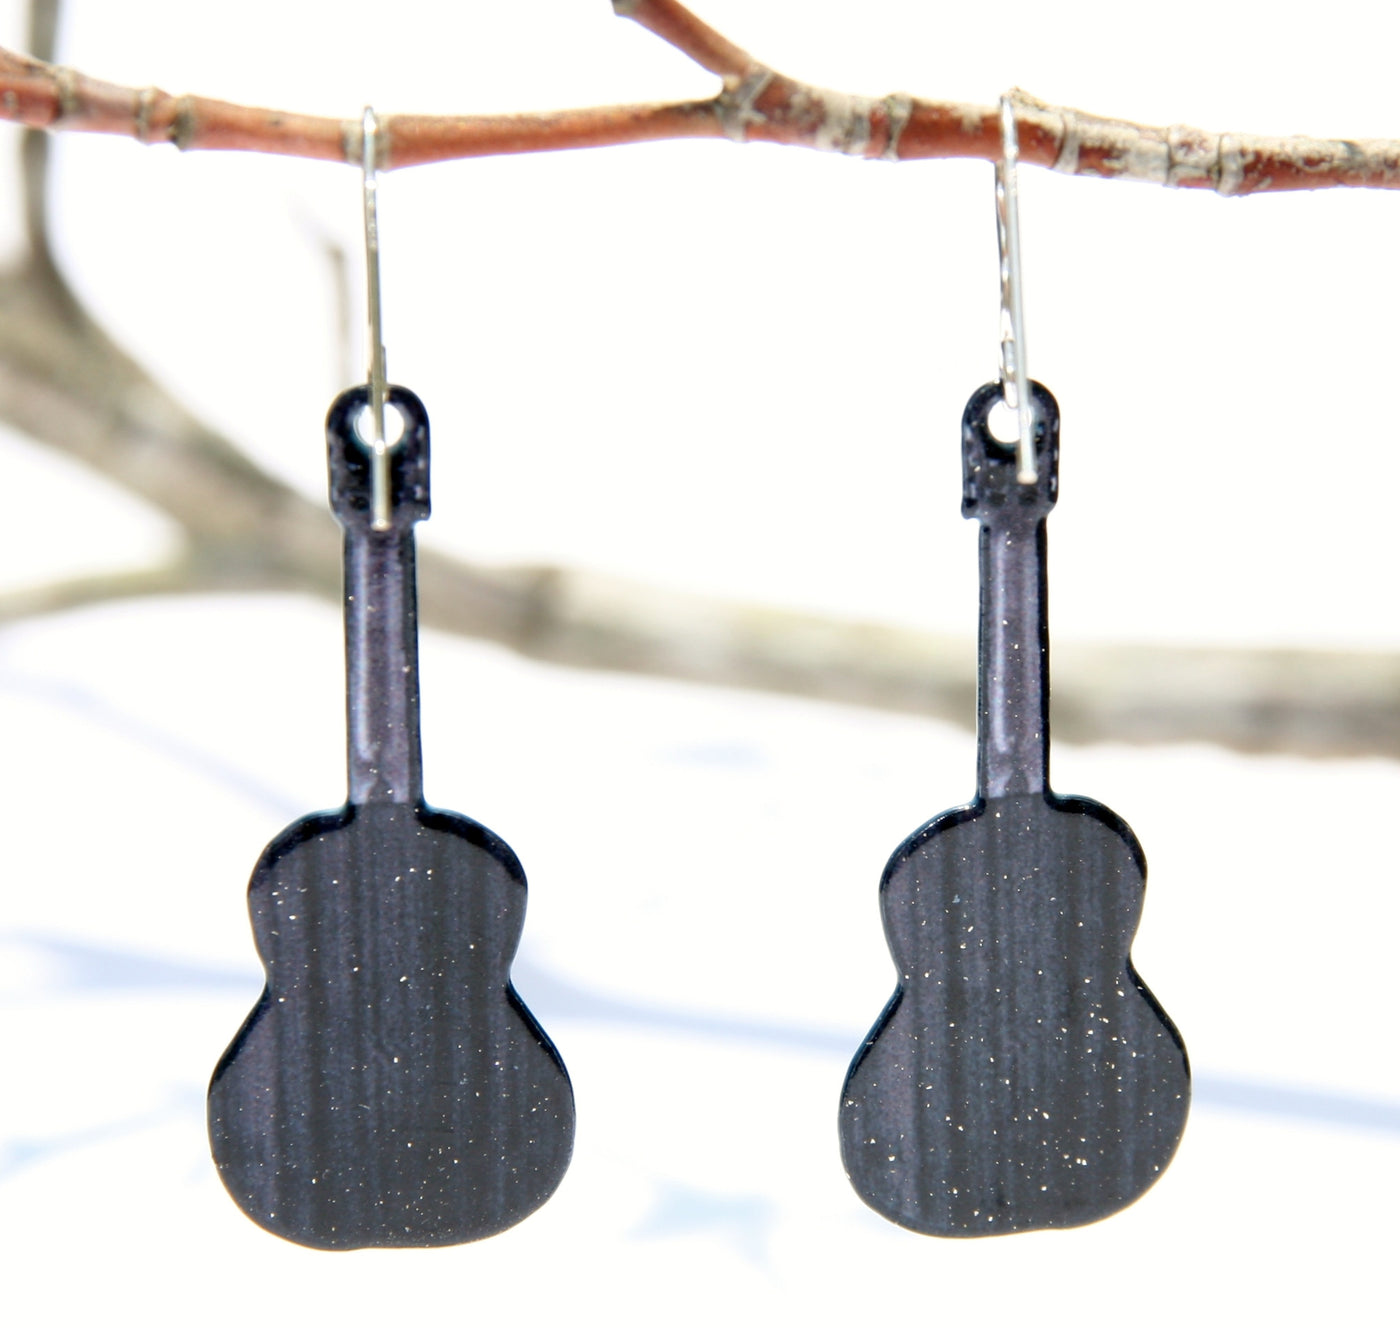 Nashville Guitar Earrings Black and White Black and white version of Nashville skyline earrings, we took this picture of downtown Nashville in February 2016.  We are the only vendors for these earrings! They have Non-tarnishing silver ear wires. Made in USA. back view